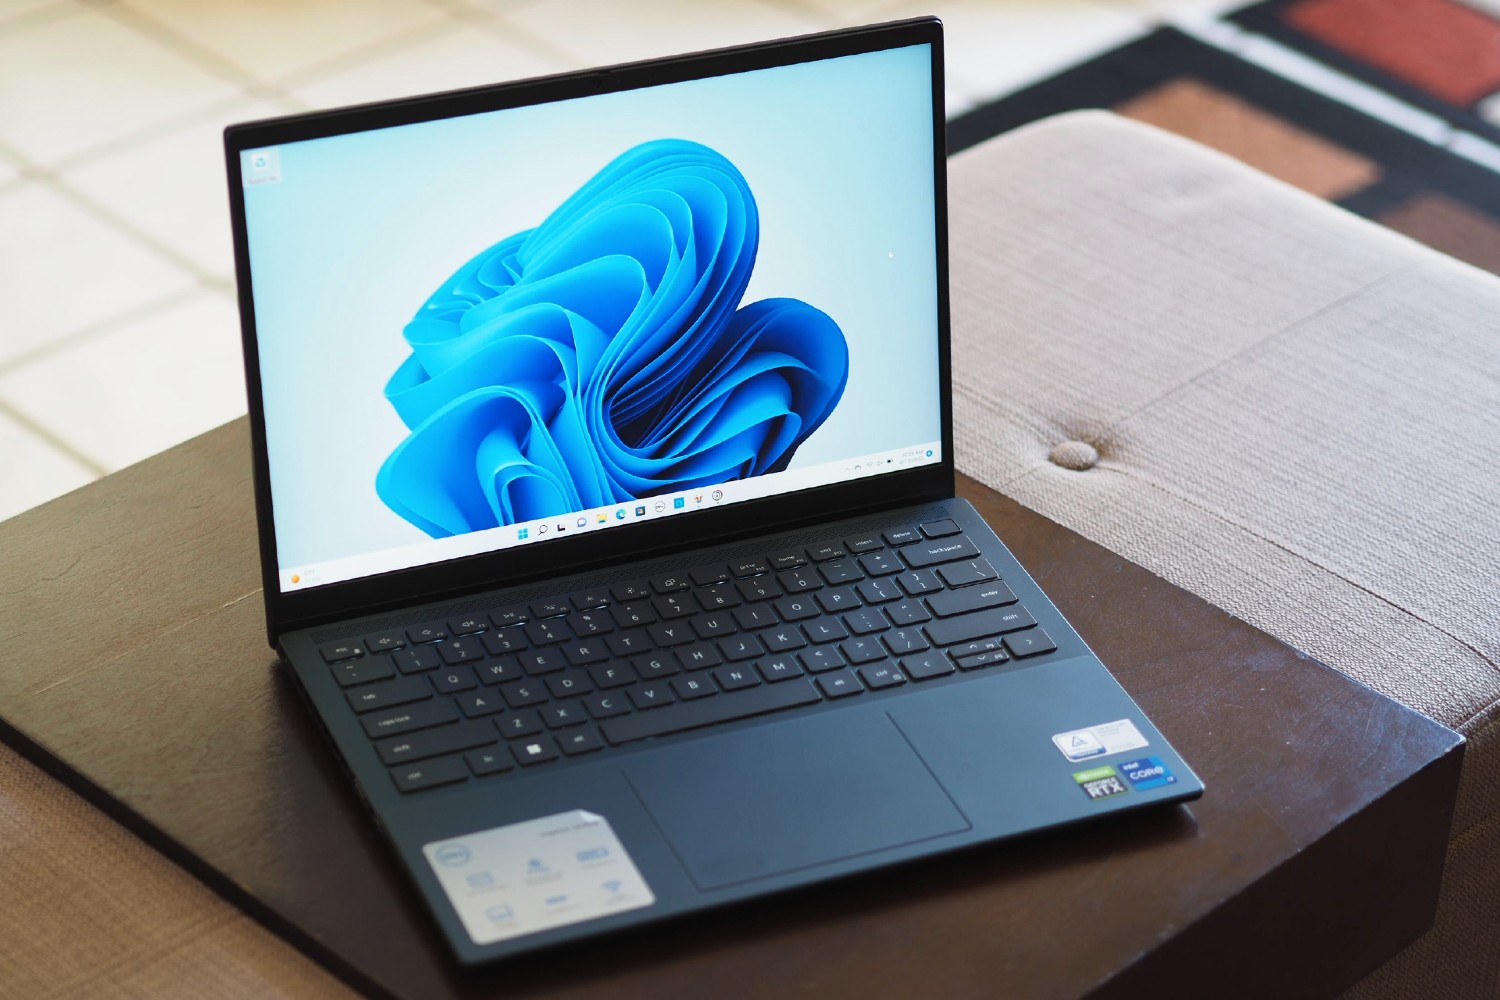 Dell Inspiron 14 Plus review: plus in more ways than one